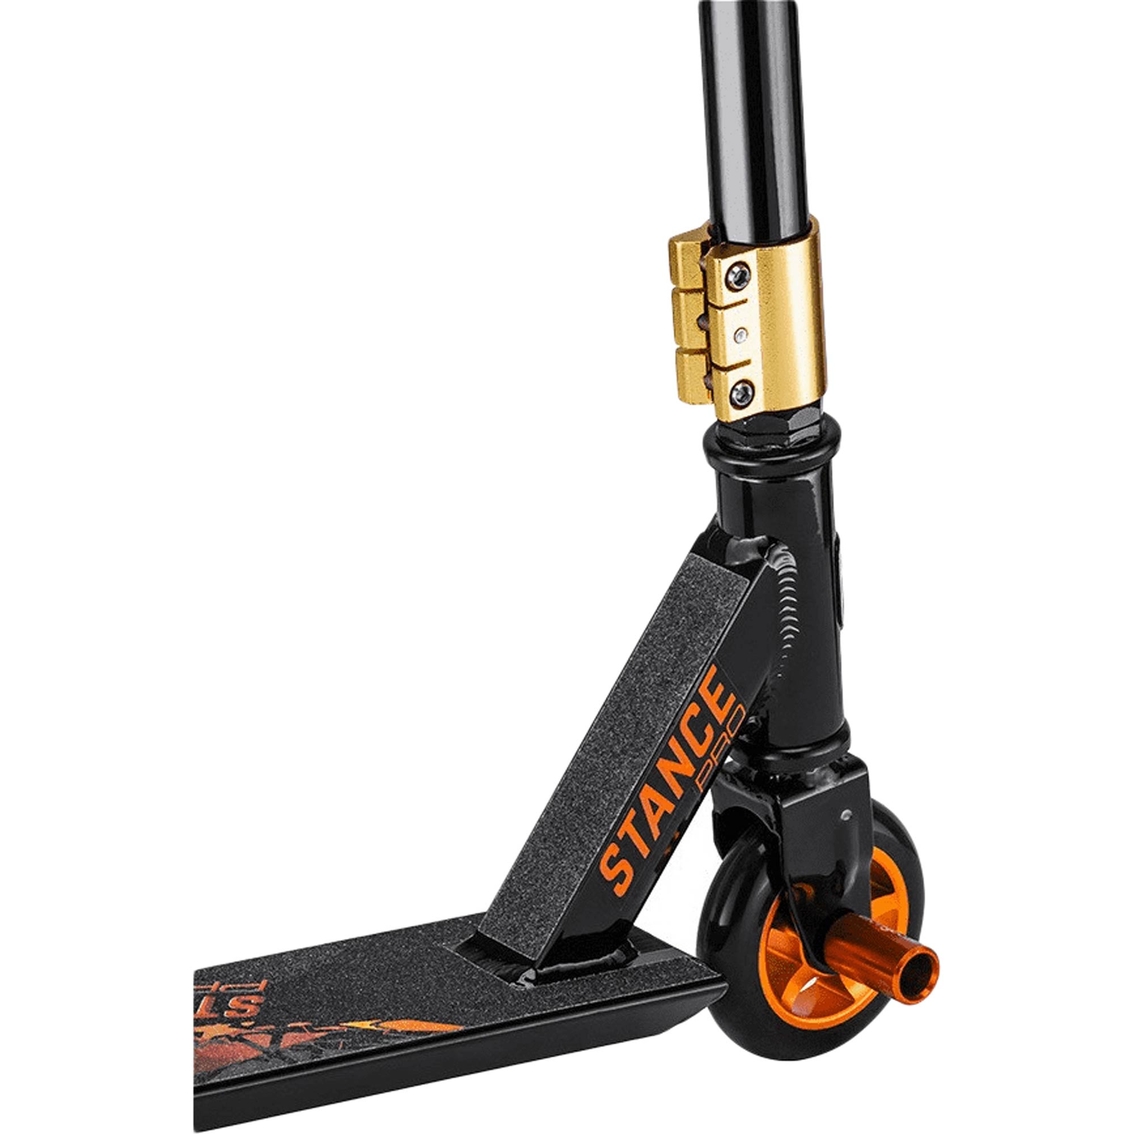 Mongoose Stance Pro Freestyle Scooter - Image 5 of 6